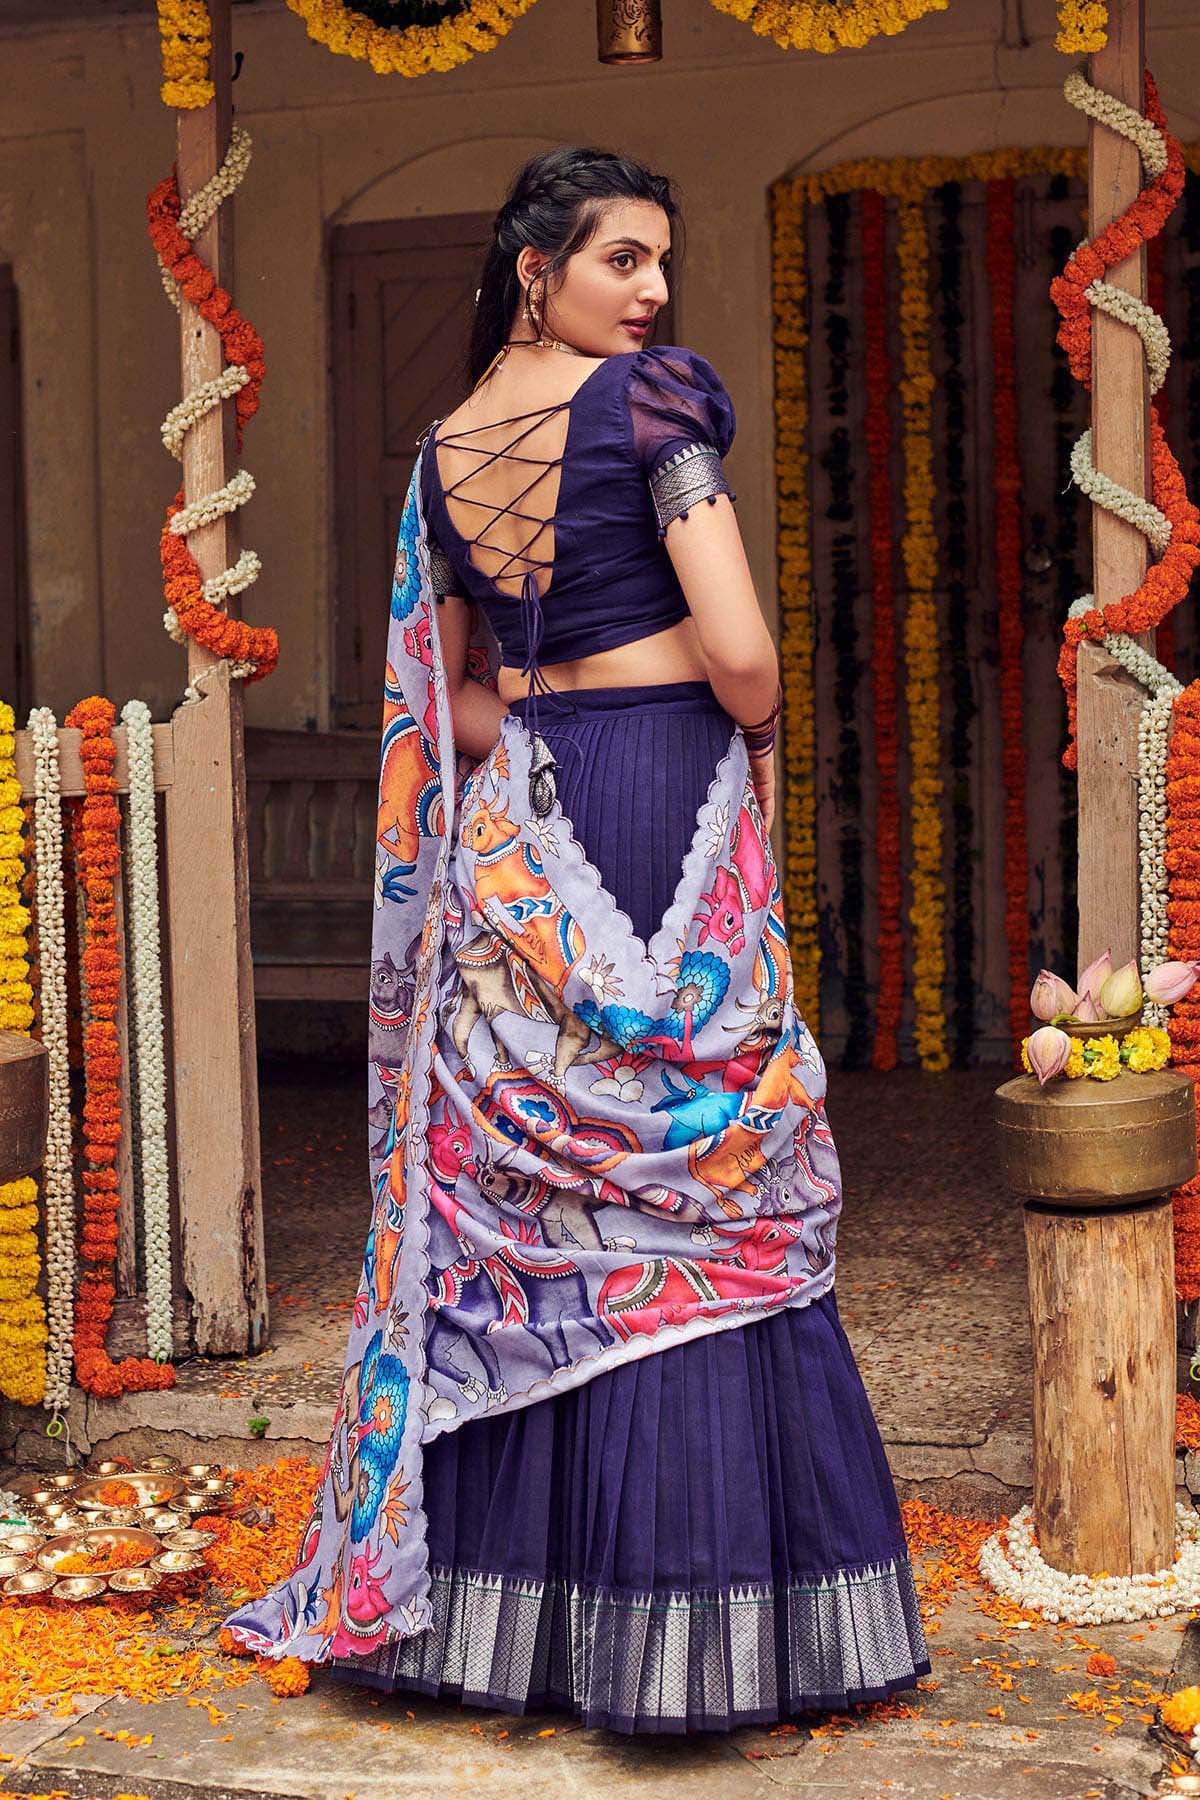 model wore the Admiral Blue Lehenga Set from the collection of Lehengas at Bullionknot